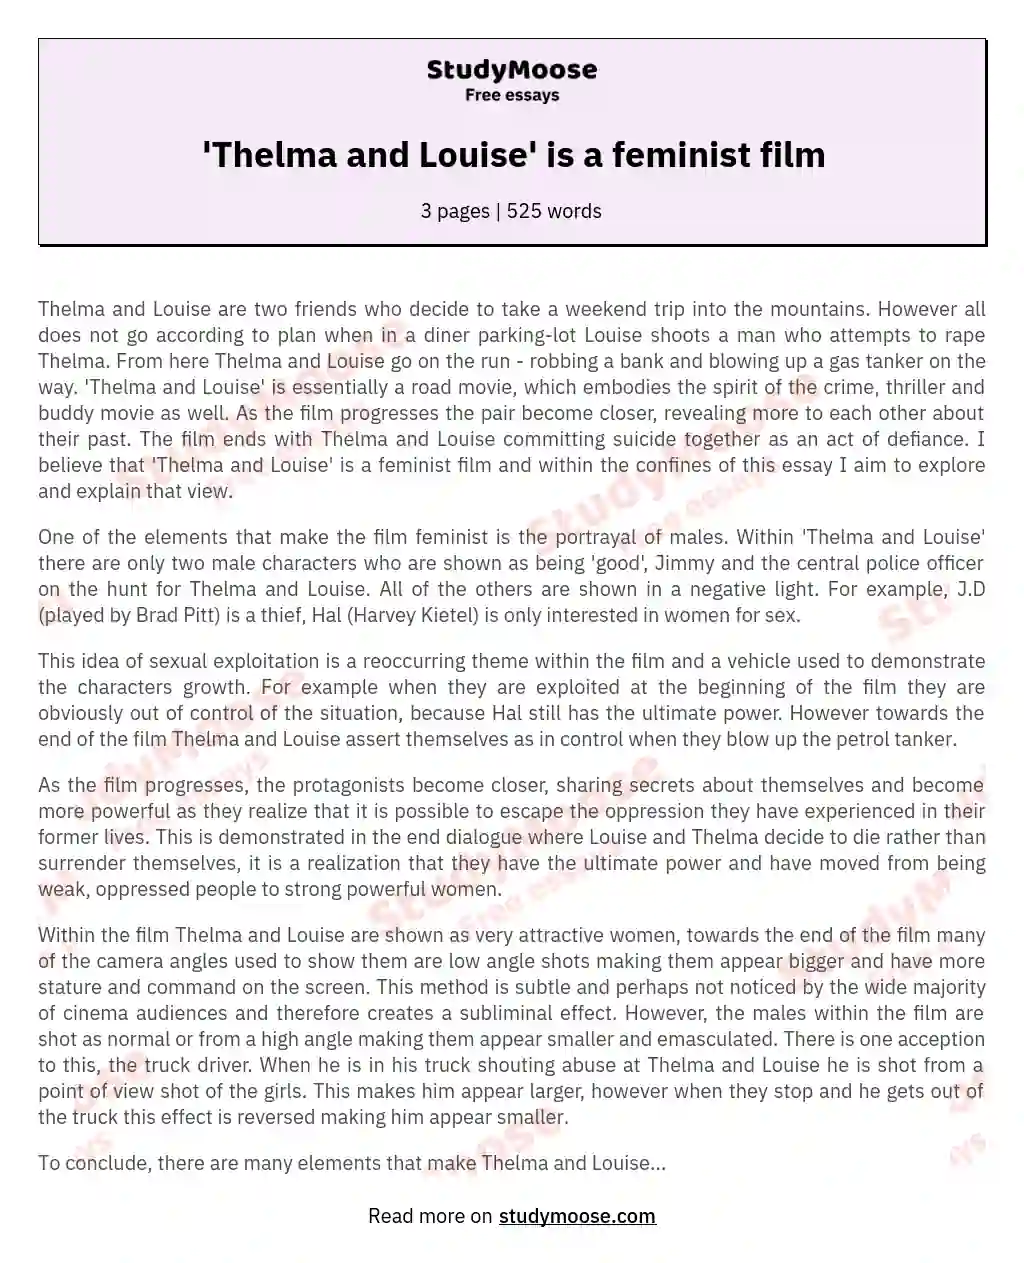 sexism in movies essay